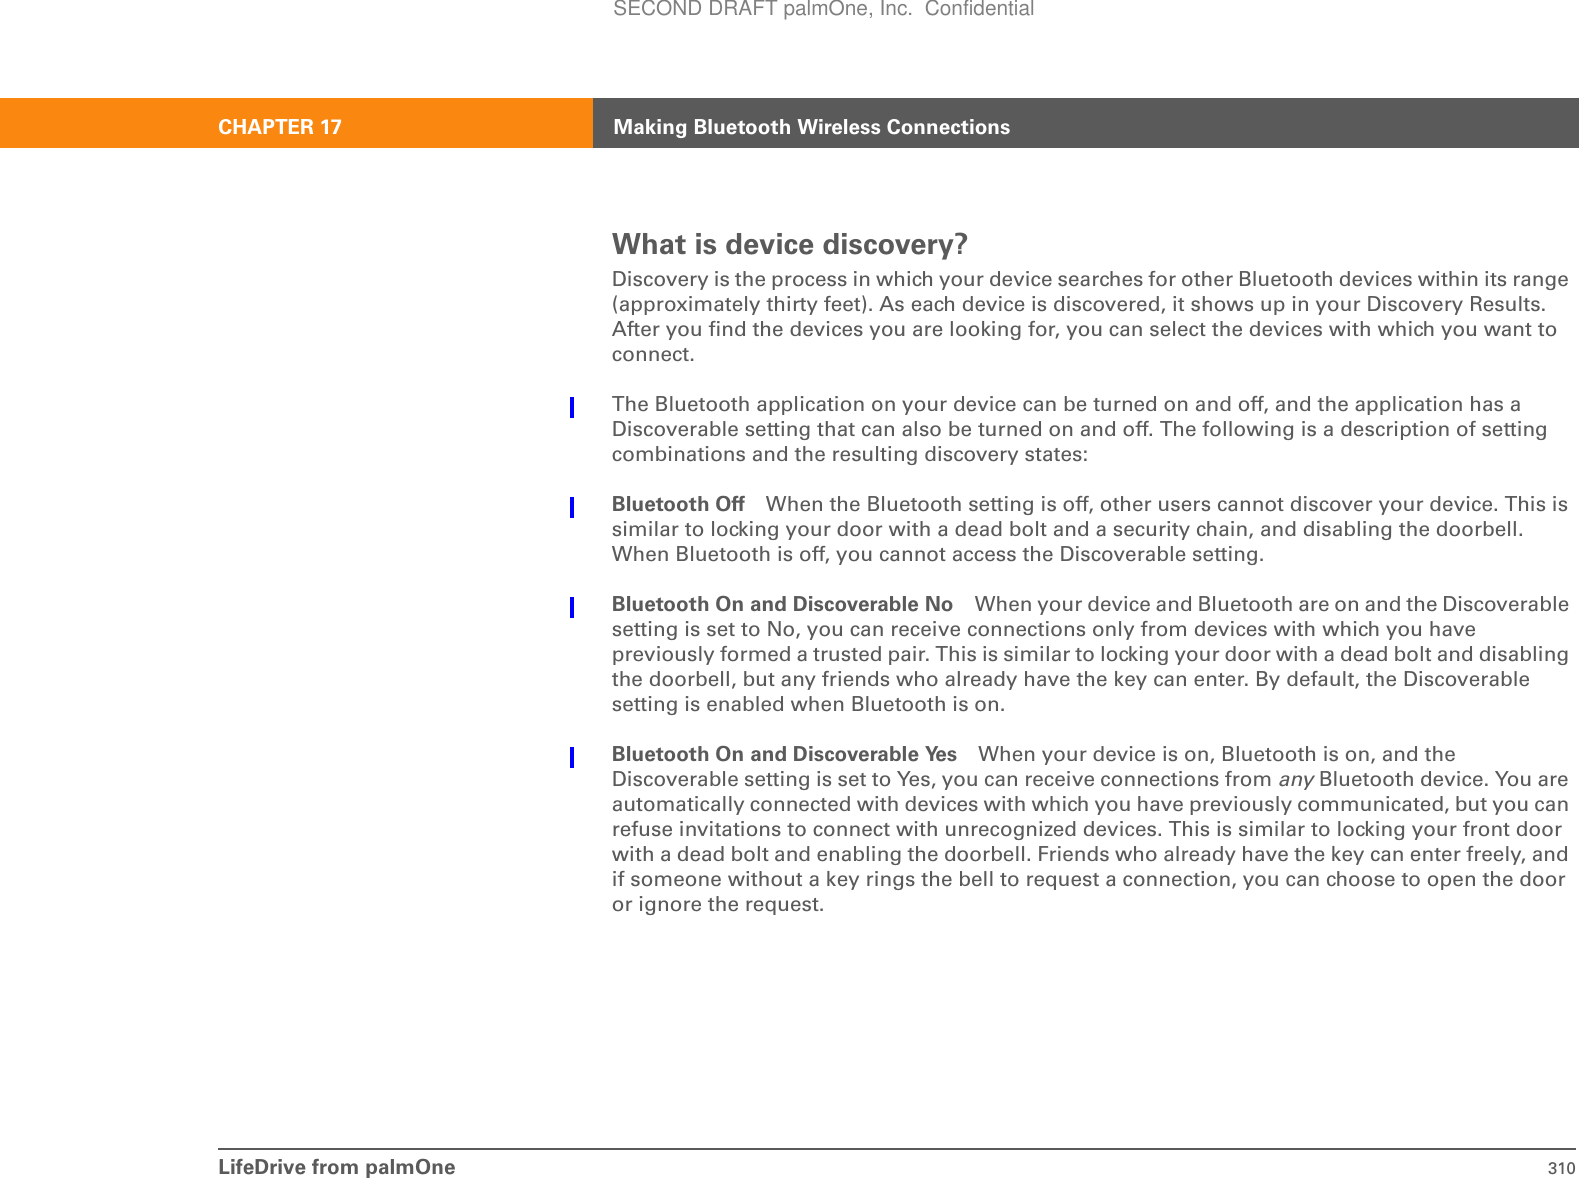 LifeDrive from palmOne 310CHAPTER 17 Making Bluetooth Wireless ConnectionsWhat is device discovery?Discovery is the process in which your device searches for other Bluetooth devices within its range (approximately thirty feet). As each device is discovered, it shows up in your Discovery Results. After you find the devices you are looking for, you can select the devices with which you want to connect. The Bluetooth application on your device can be turned on and off, and the application has a Discoverable setting that can also be turned on and off. The following is a description of setting combinations and the resulting discovery states:Bluetooth Off When the Bluetooth setting is off, other users cannot discover your device. This is similar to locking your door with a dead bolt and a security chain, and disabling the doorbell. When Bluetooth is off, you cannot access the Discoverable setting. Bluetooth On and Discoverable No When your device and Bluetooth are on and the Discoverable setting is set to No, you can receive connections only from devices with which you have previously formed a trusted pair. This is similar to locking your door with a dead bolt and disabling the doorbell, but any friends who already have the key can enter. By default, the Discoverable setting is enabled when Bluetooth is on. Bluetooth On and Discoverable Yes When your device is on, Bluetooth is on, and the Discoverable setting is set to Yes, you can receive connections from any Bluetooth device. You are automatically connected with devices with which you have previously communicated, but you can refuse invitations to connect with unrecognized devices. This is similar to locking your front door with a dead bolt and enabling the doorbell. Friends who already have the key can enter freely, and if someone without a key rings the bell to request a connection, you can choose to open the door or ignore the request.SECOND DRAFT palmOne, Inc.  Confidential